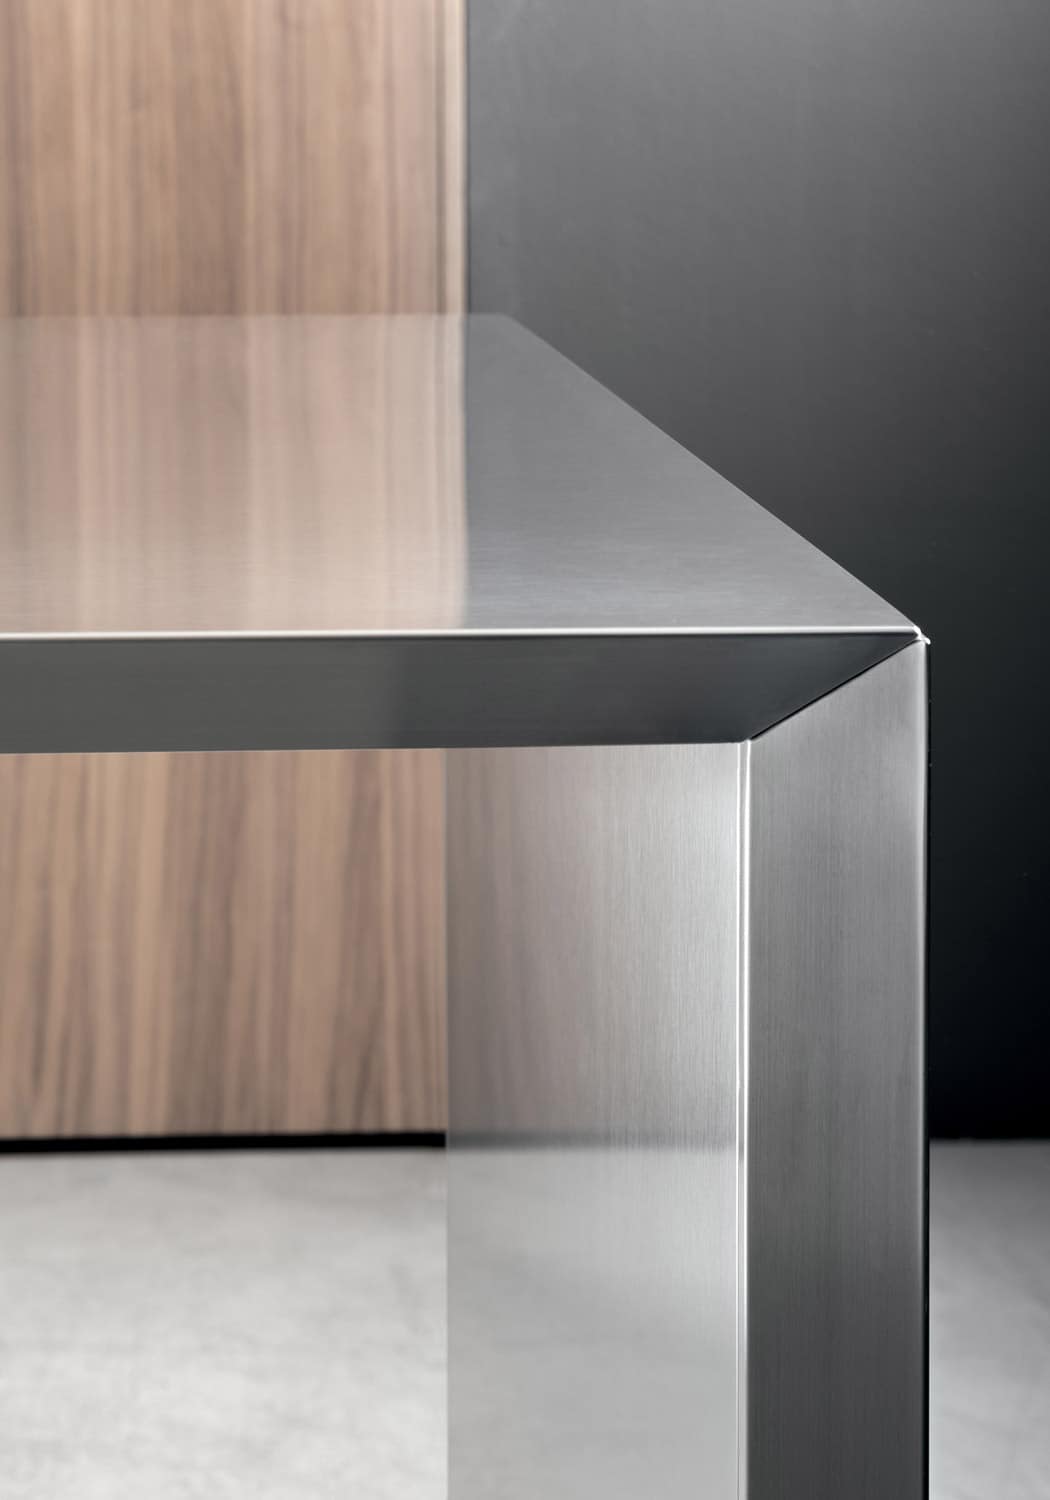 The project’s attention to details is also reflected in the steel worktop/table extending from the island.